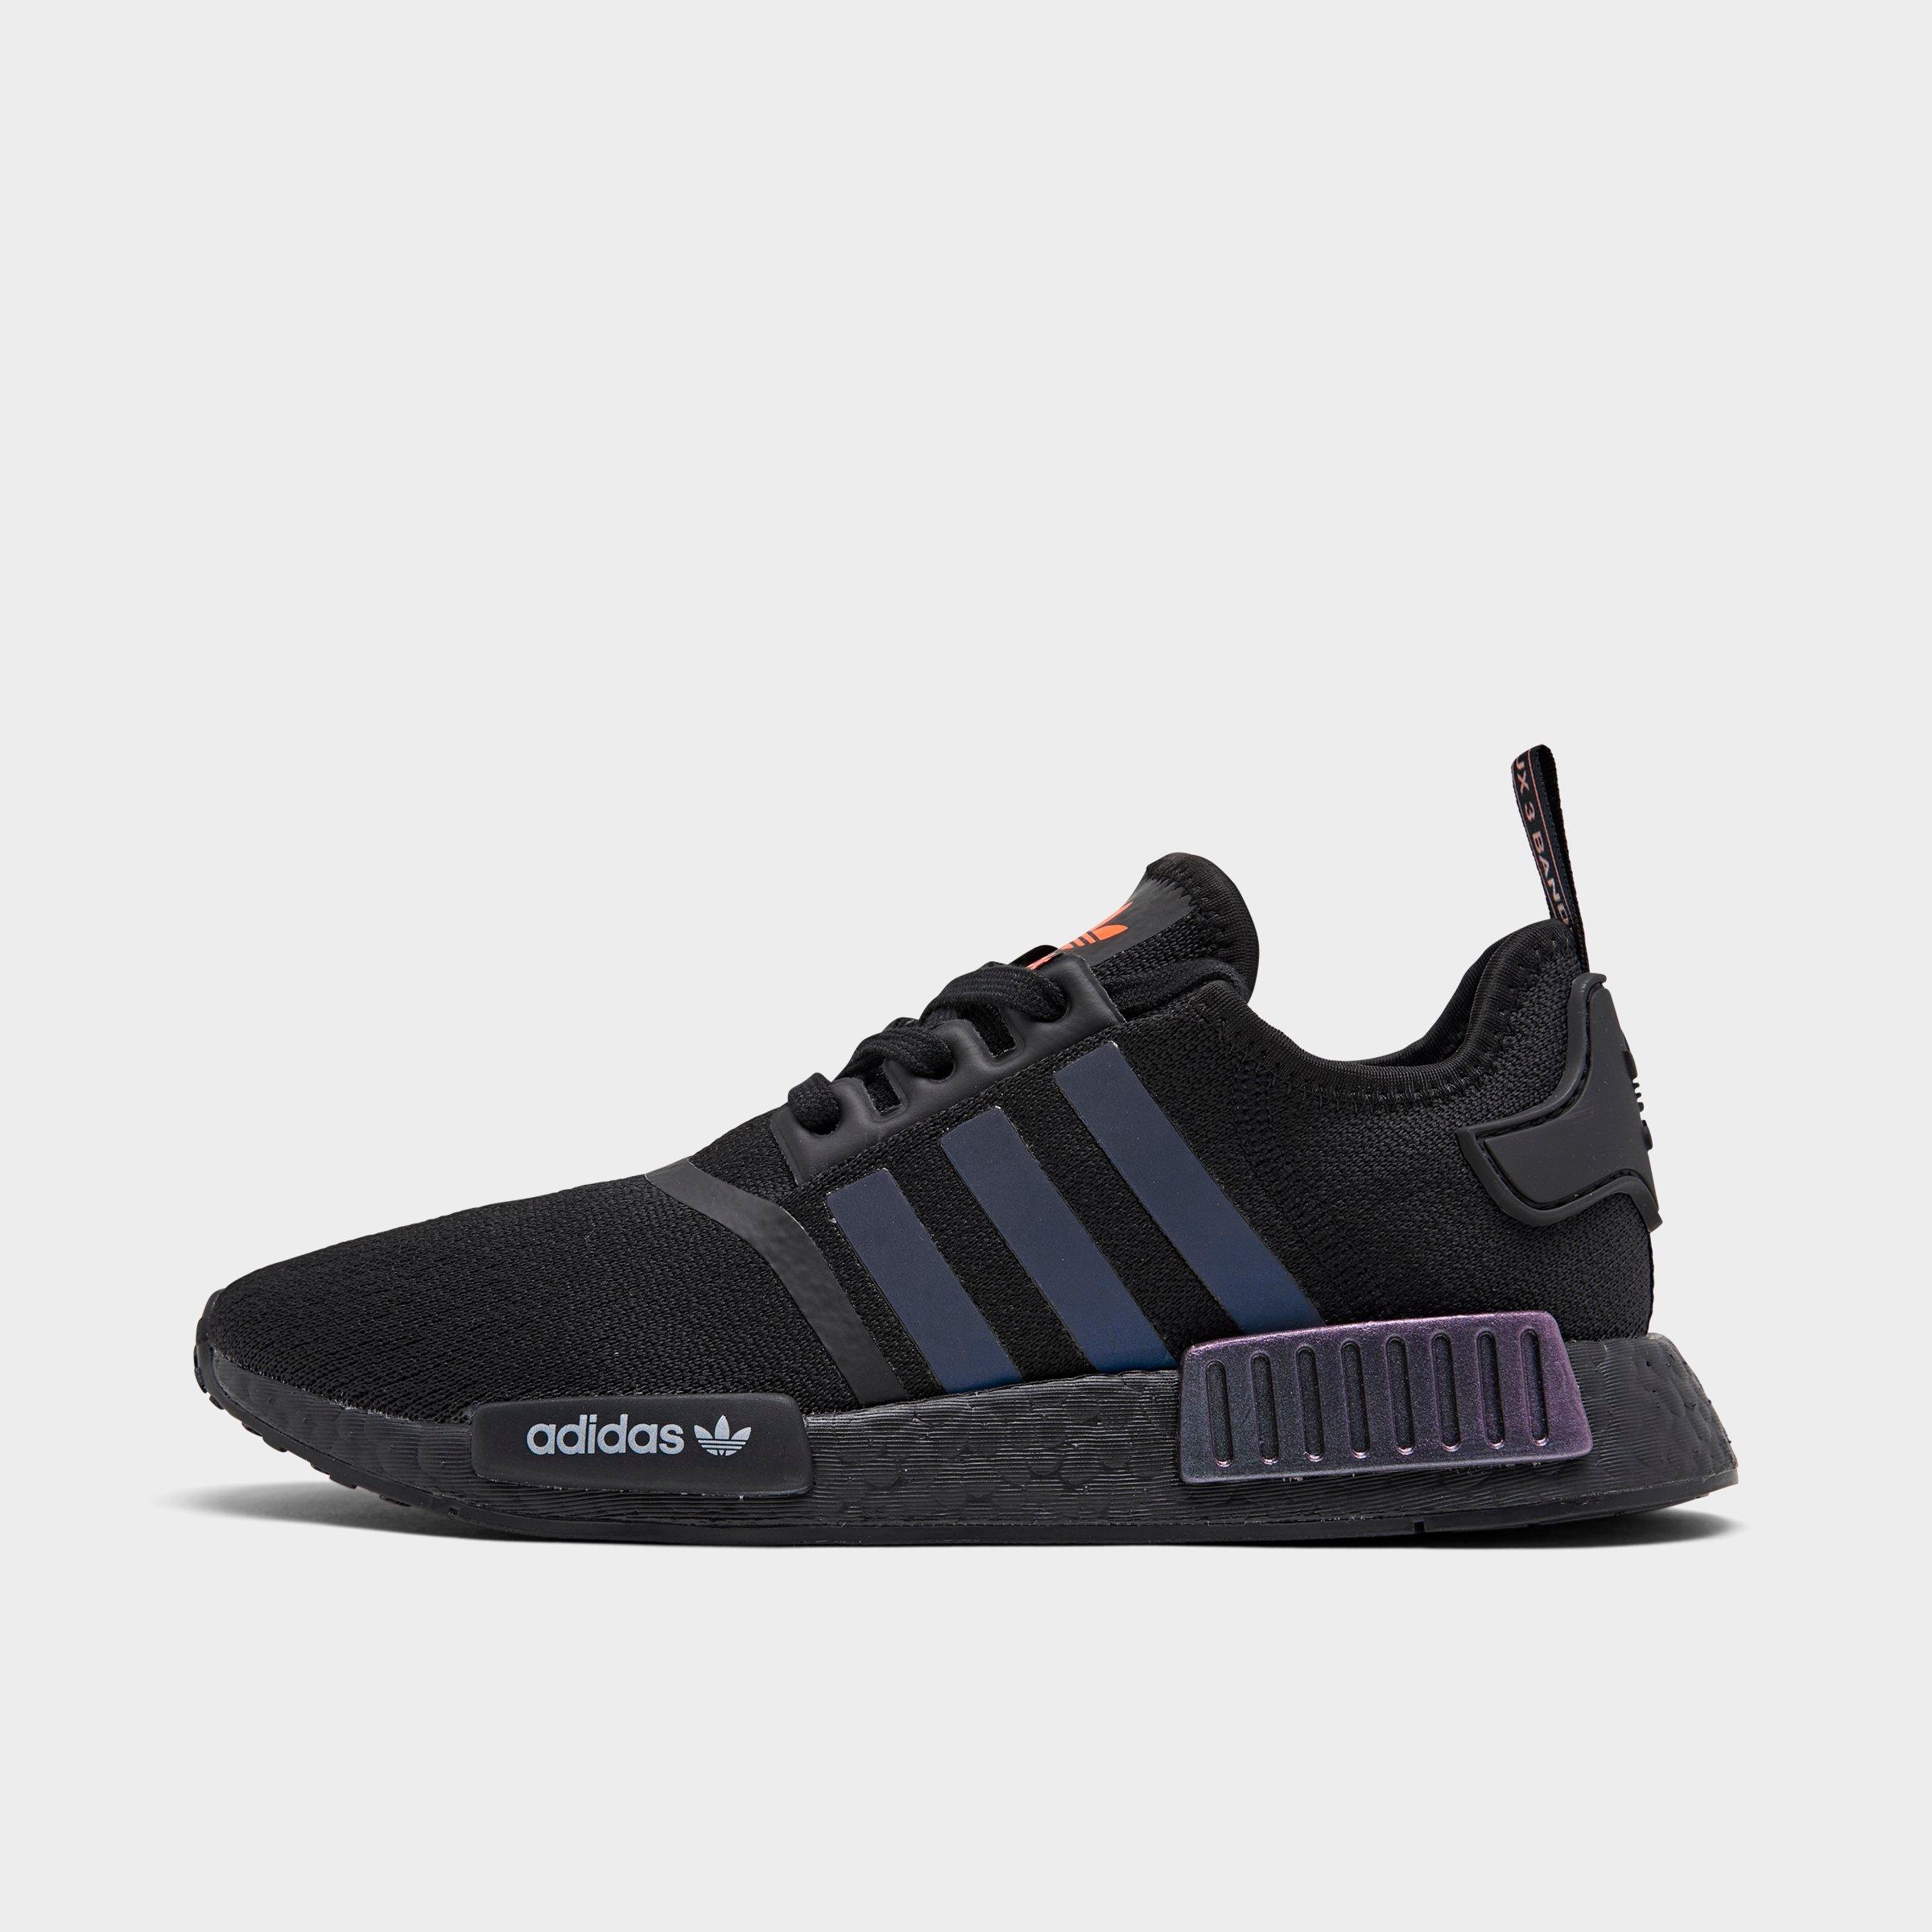 UPC 193106000798 product image for Adidas Men's Originals NMD R1 Casual Shoes in Black Size 9.5 | upcitemdb.com